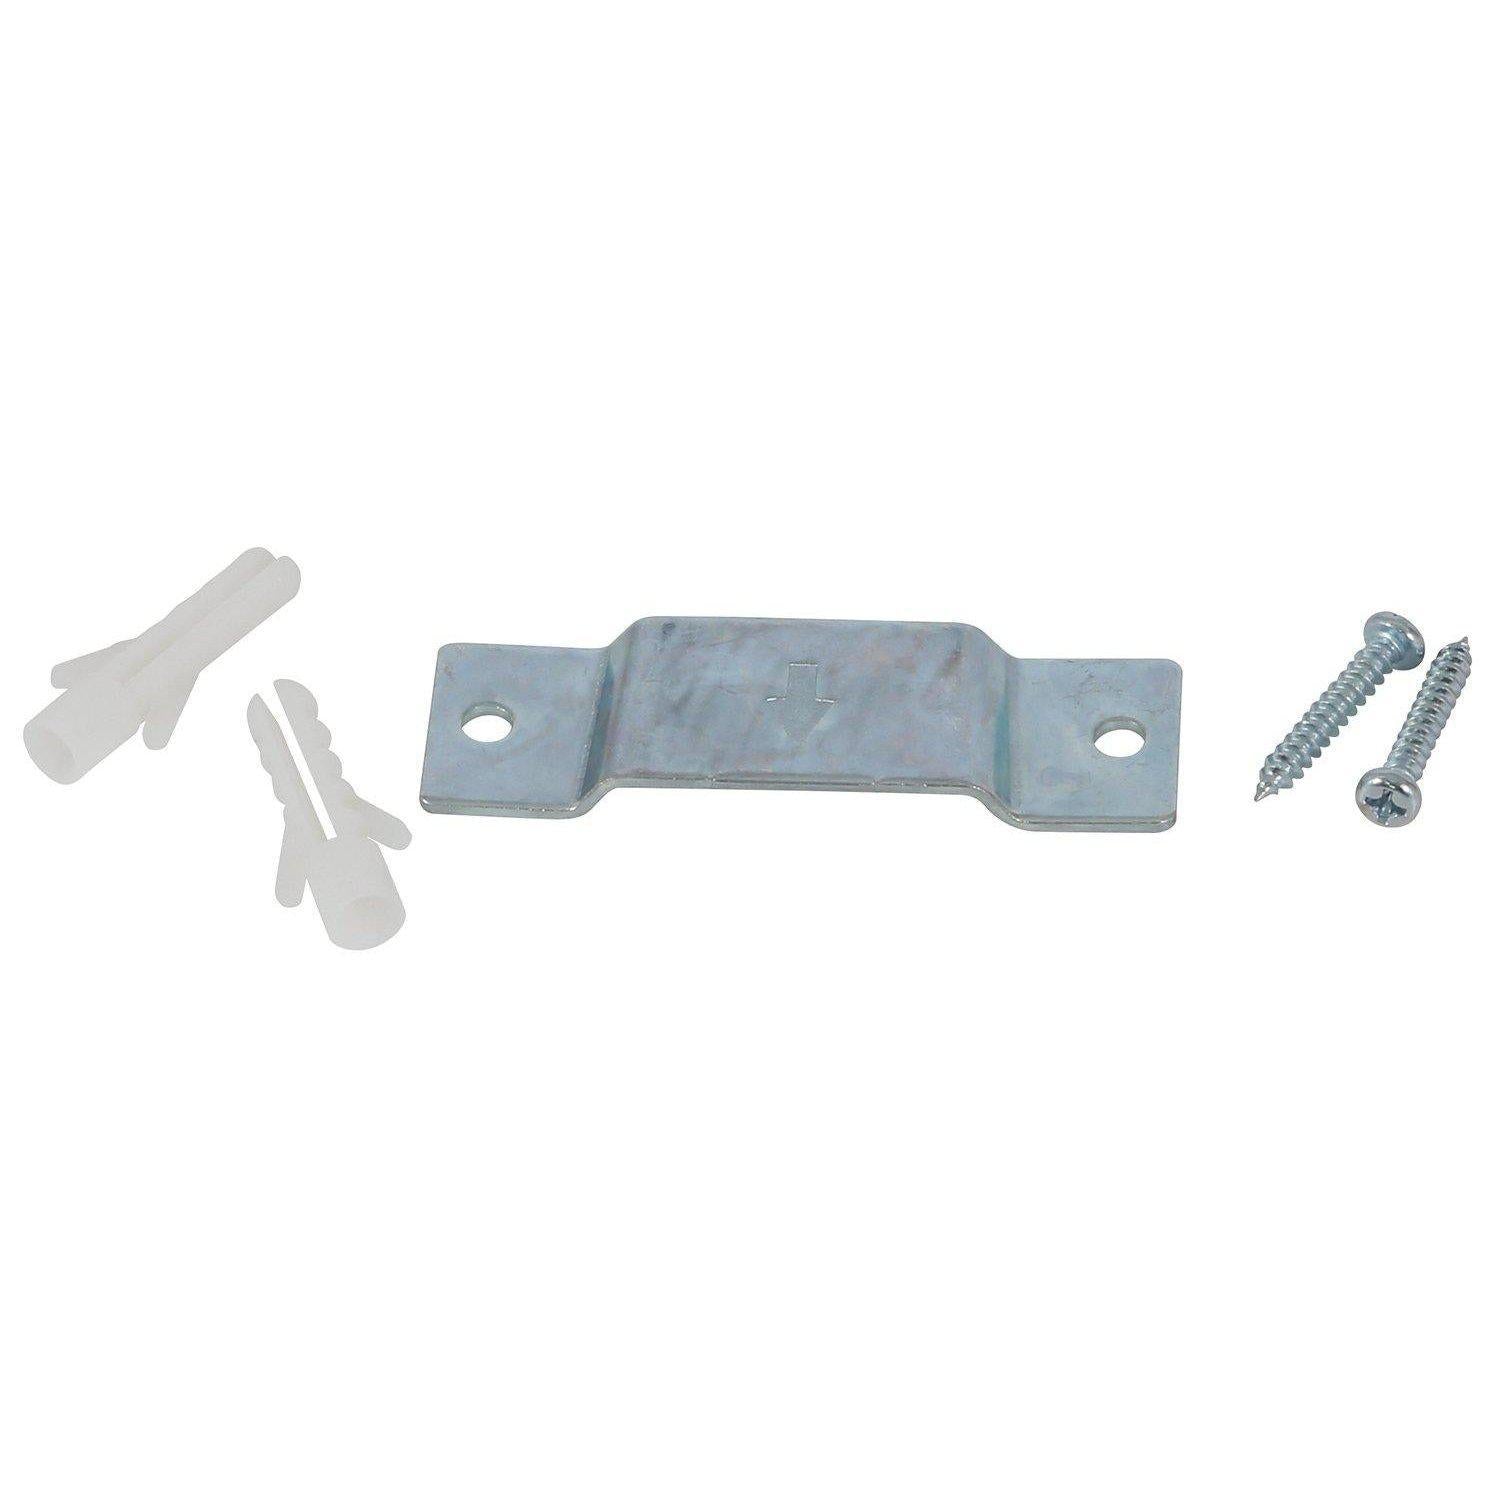 Climate - Hurricane Replacement Wall Mount Bracket for Parts 736505, 736506, and 736565 - Gardin Warehouse